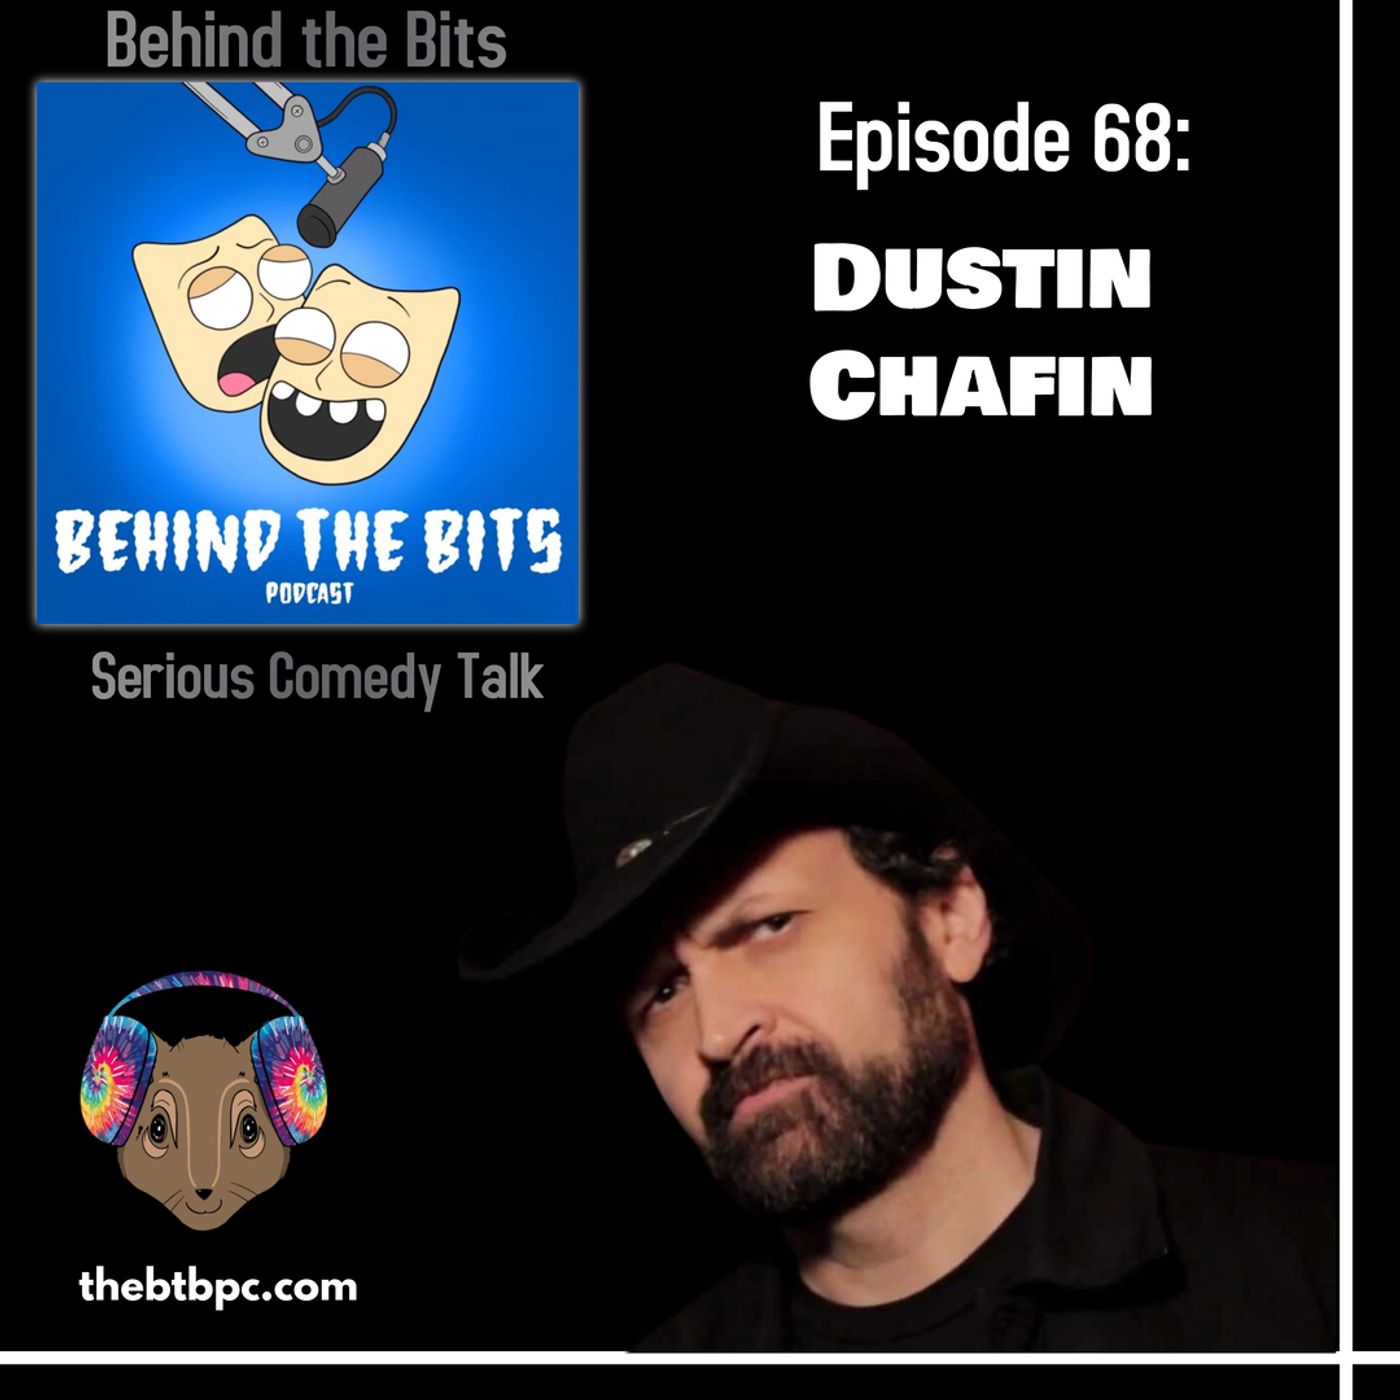 Episode 68: Dustin Chafin Image